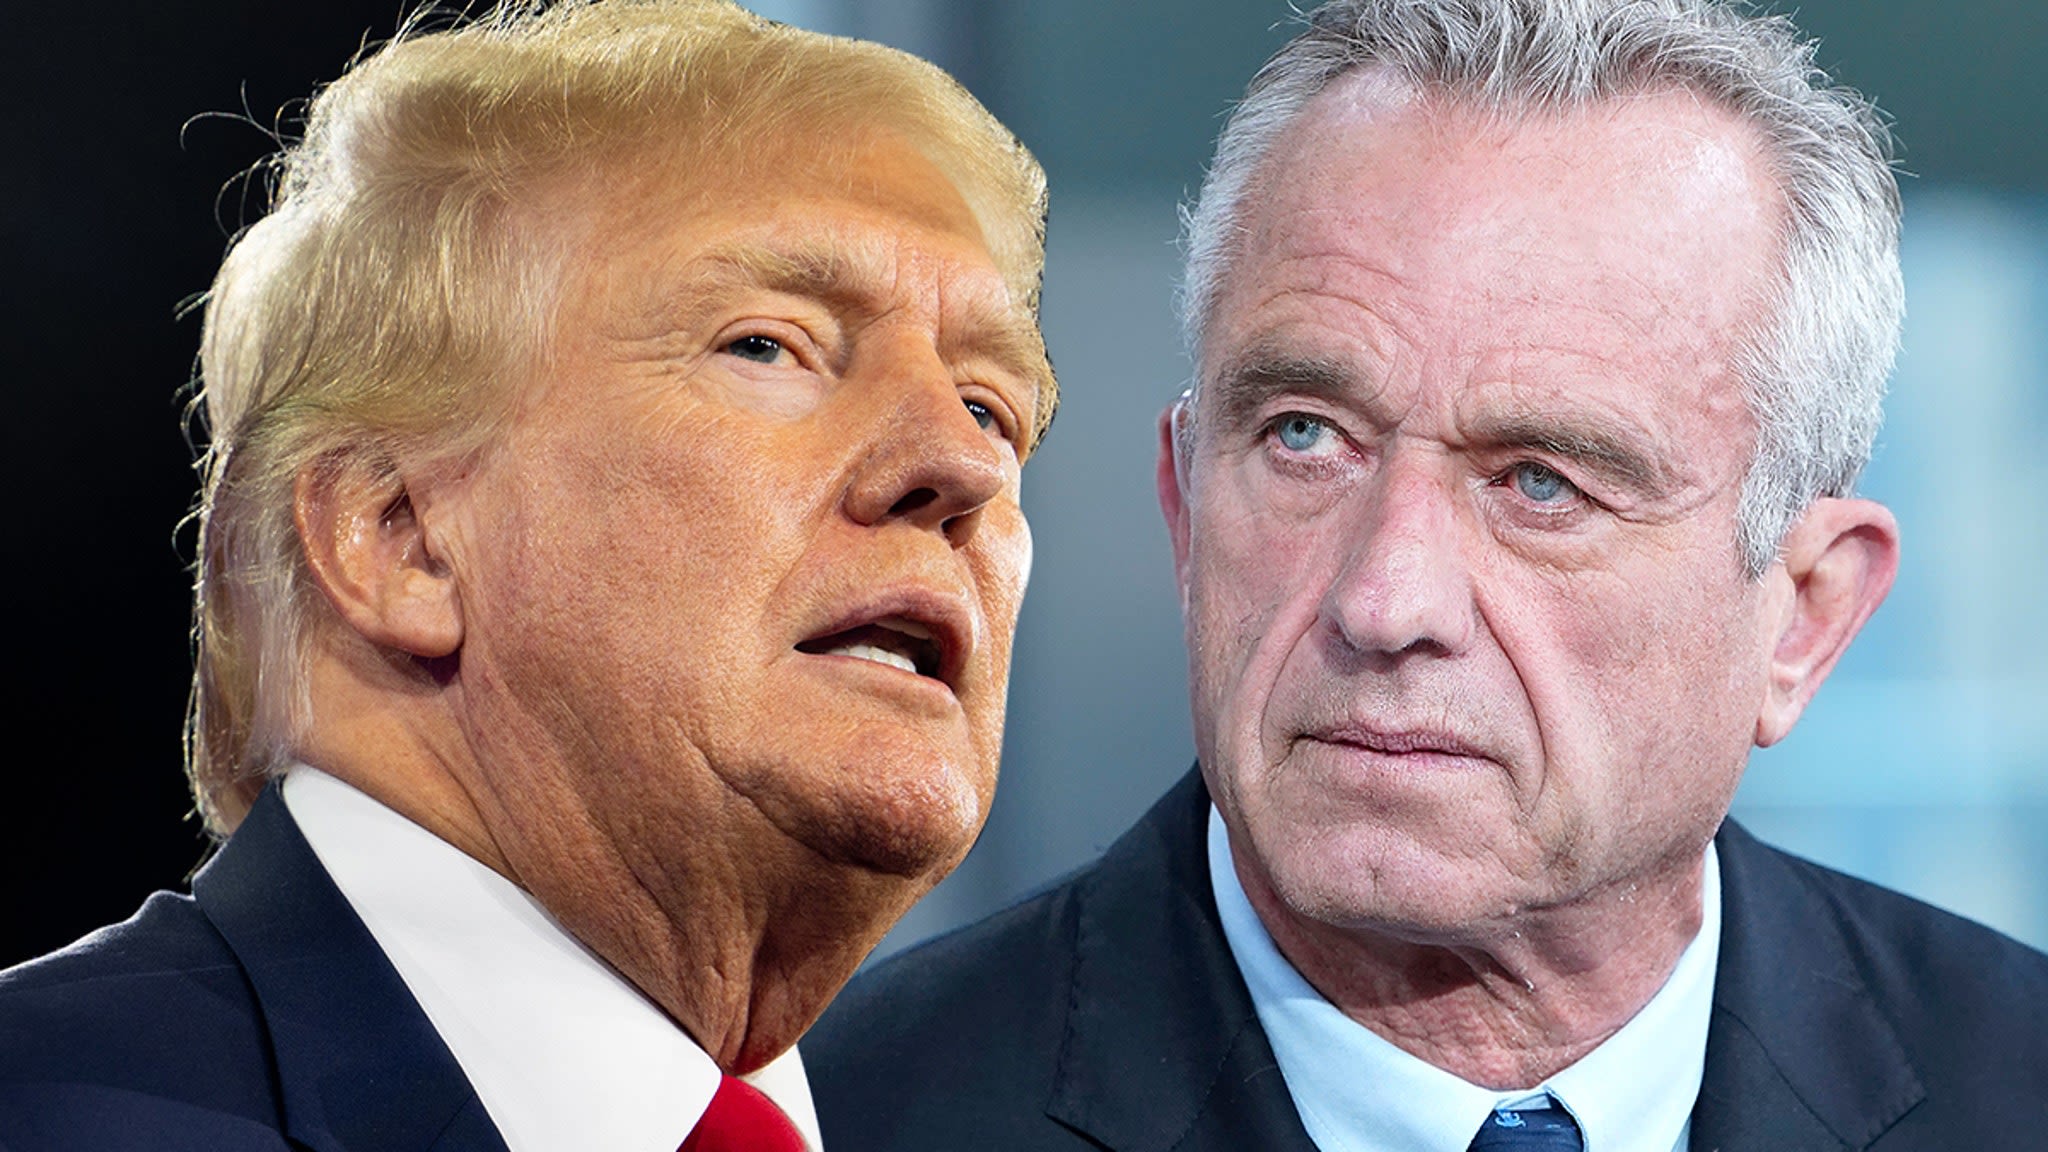 Trump Says It's Imperative Robert F. Kennedy Jr. Get Secret Service Protection